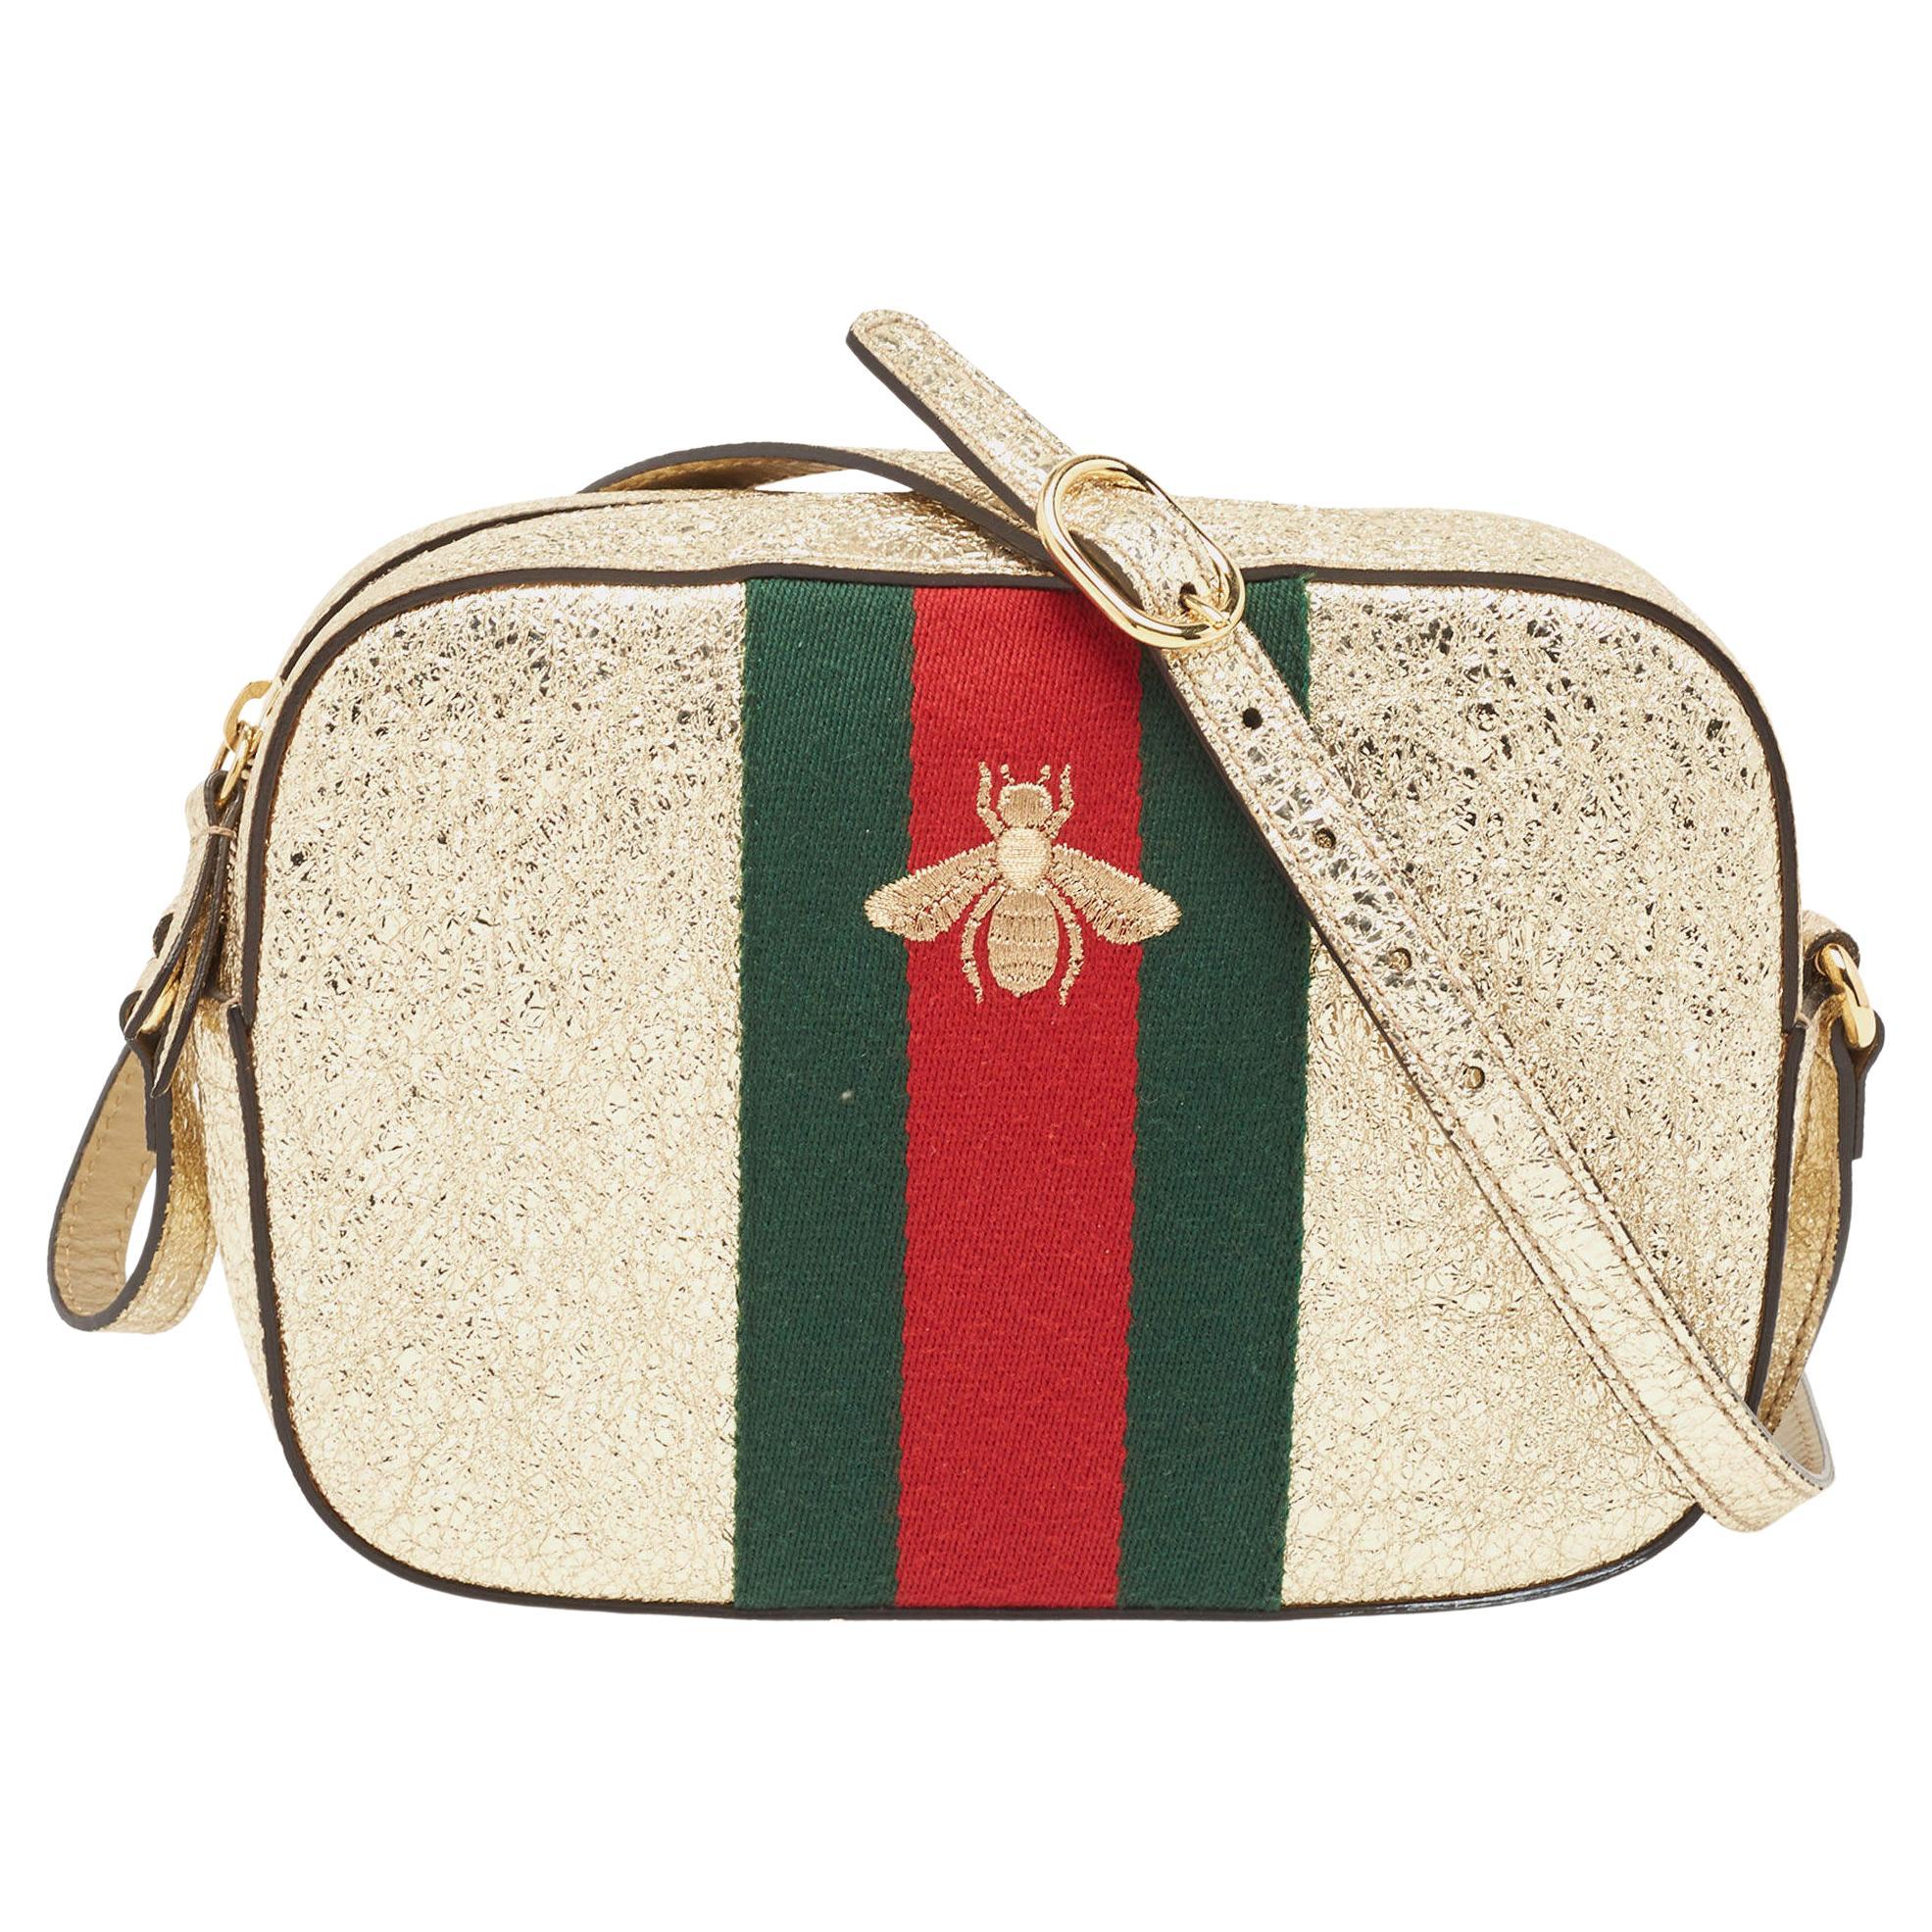 Gucci Metallic Gold Crinkled Leather Webby Bee Crossbody Bag